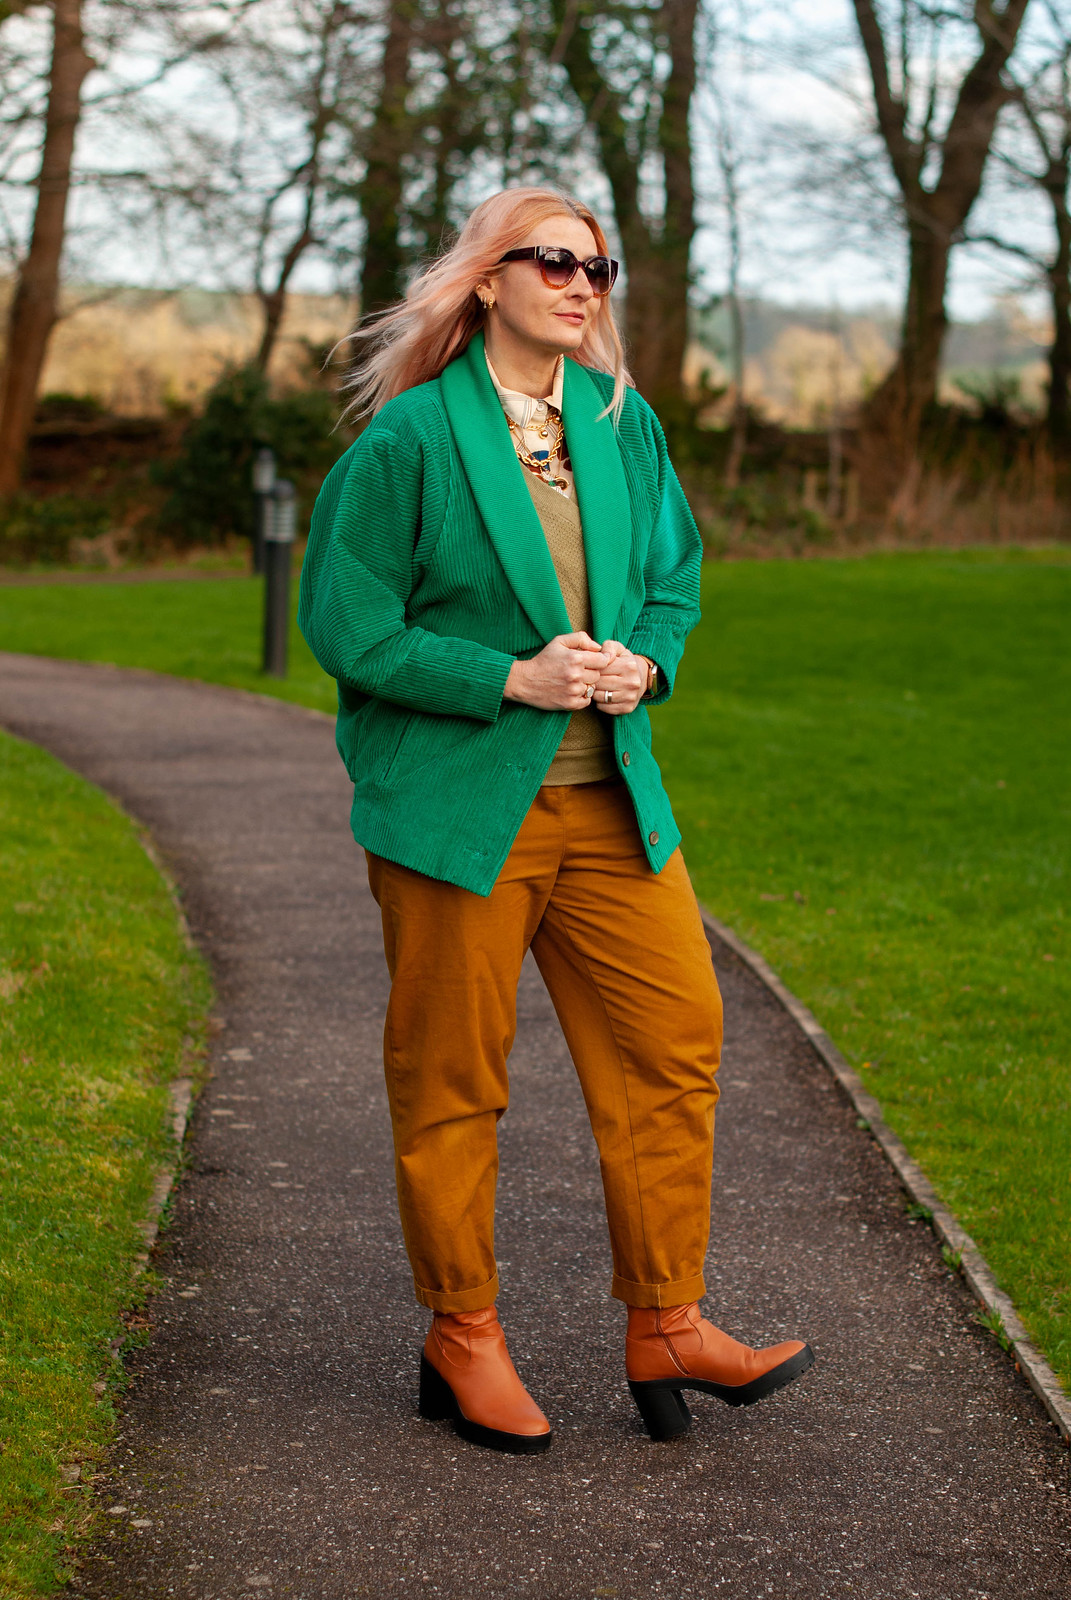 Styling My Mum's Vintage 80s Green Corduroy Jacket (with an olive tank top, patterned shirt, tobacco brown peg leg trousers and layered gold necklaces) | Not Dressed As Lamb, over 40 style blog